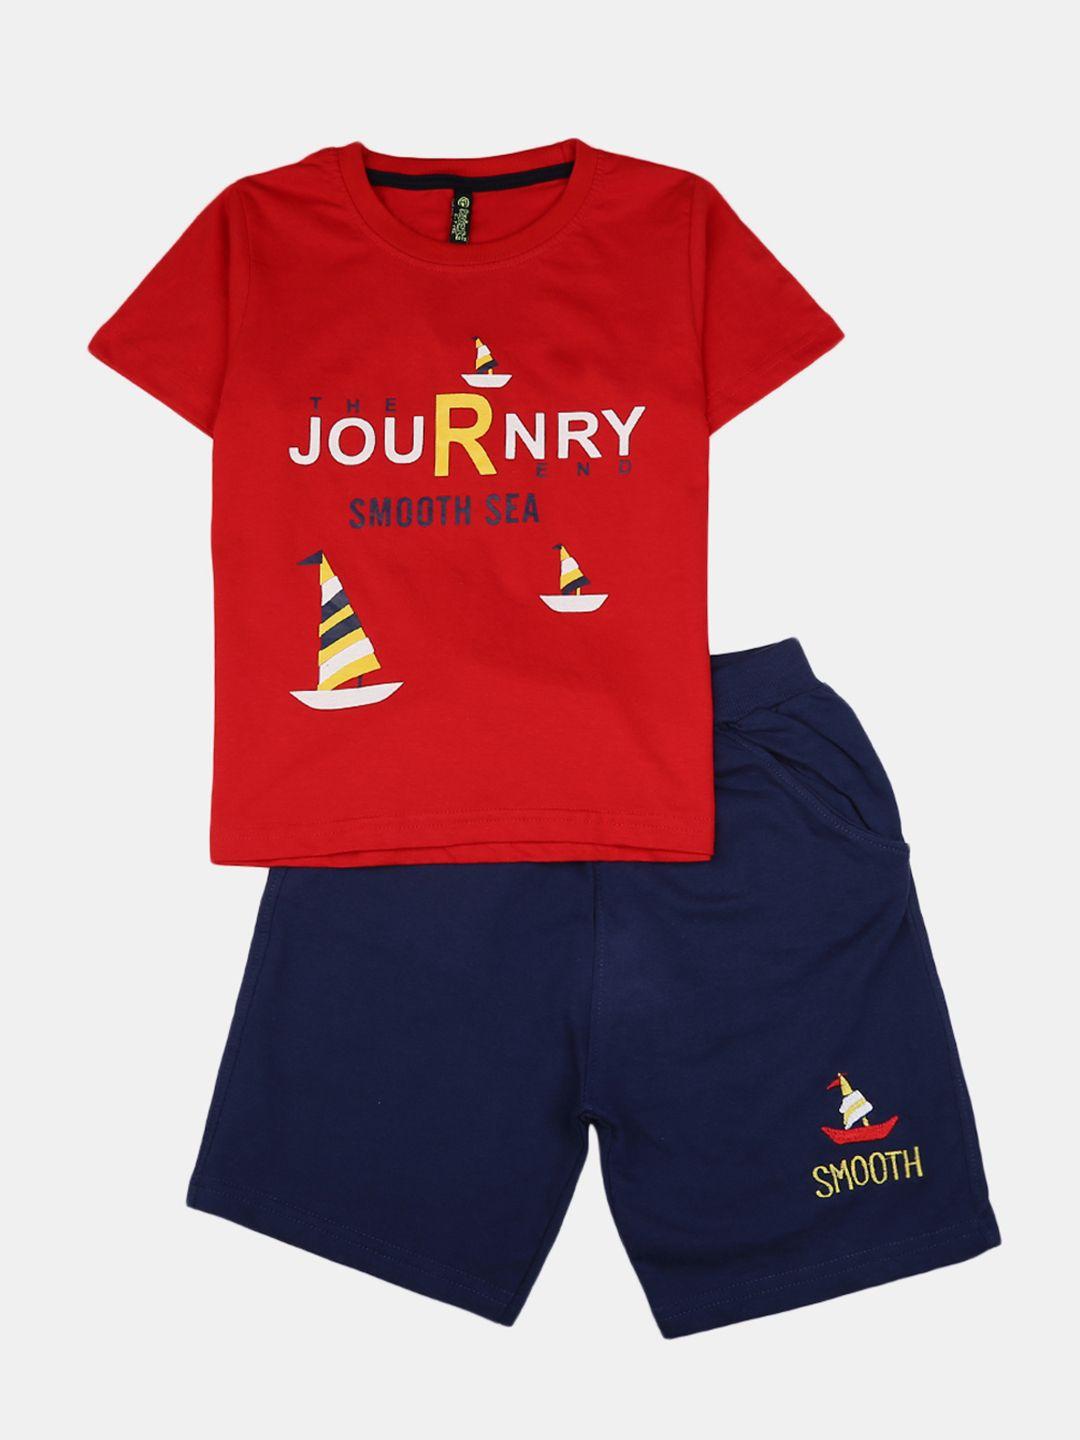 v-mart-unisex-kids-red-and-navy-blue-printed-pure-cotton-t-shirt-with-shorts